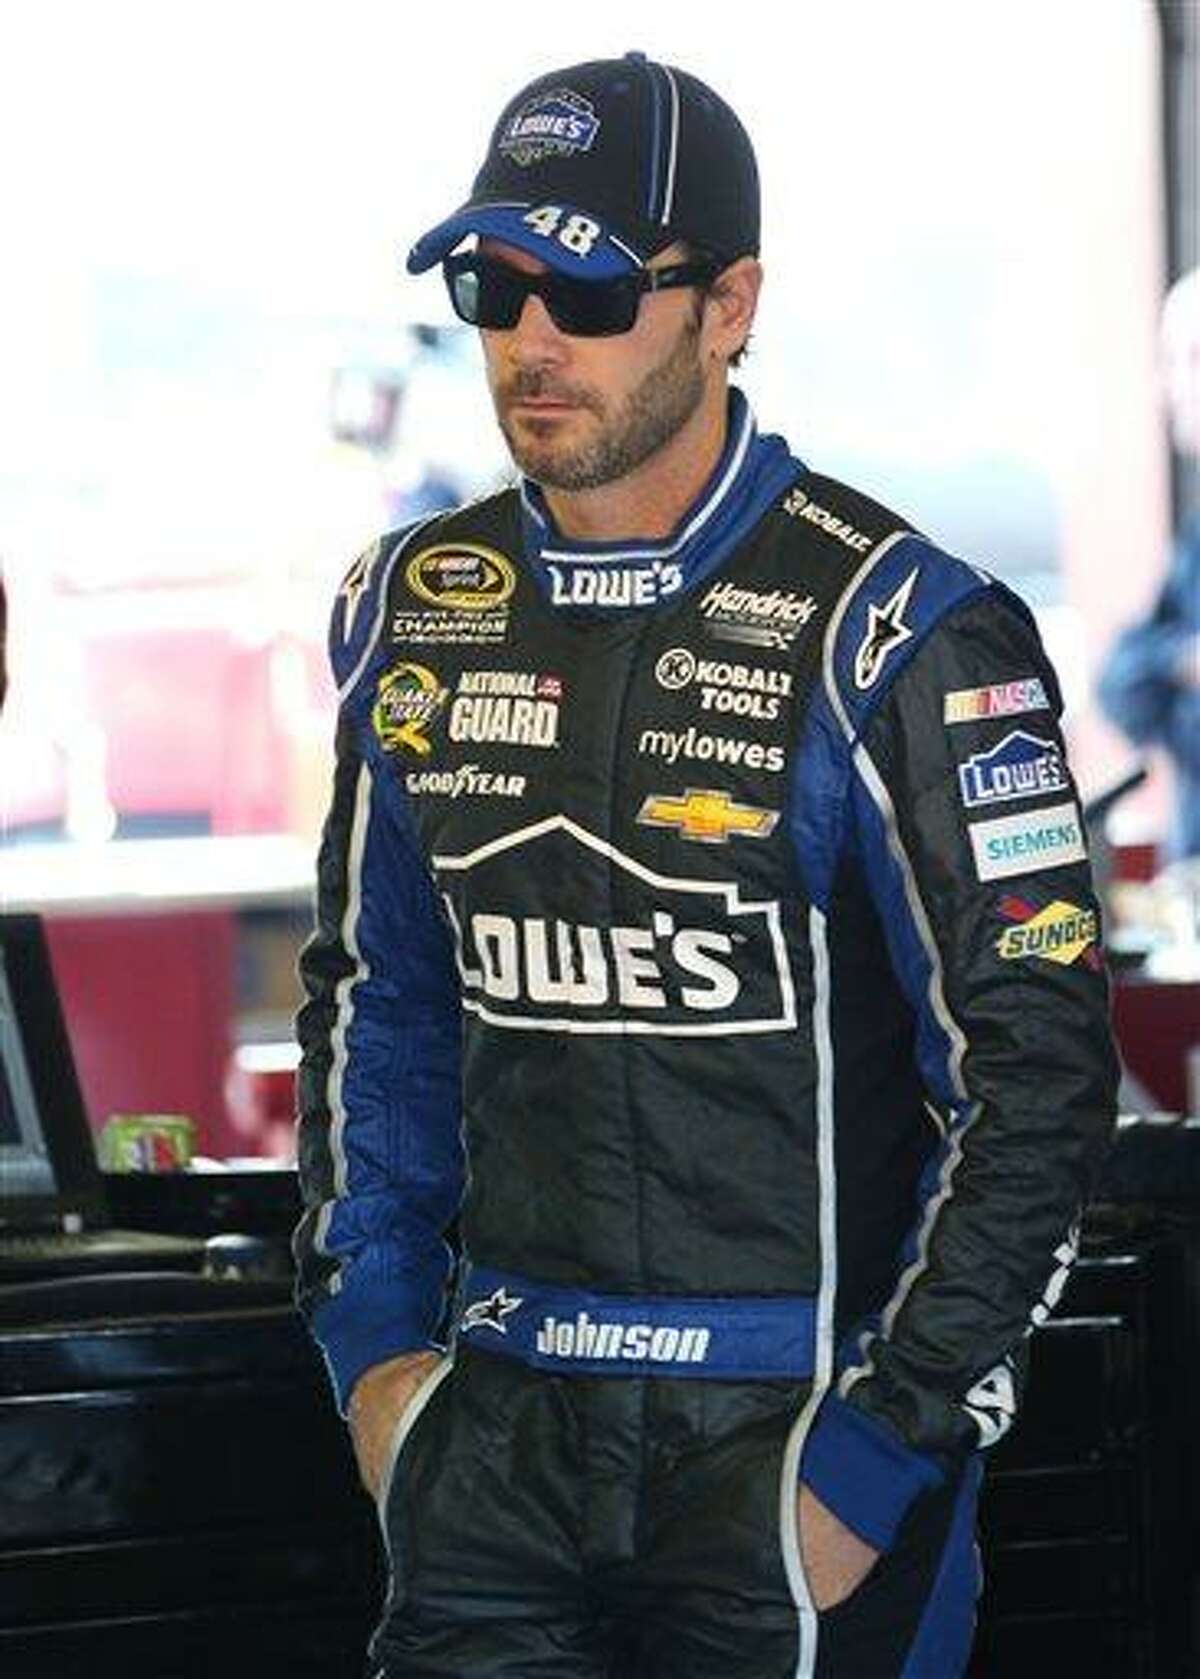 Jimmie Johnson watches as the crew works on his car during practice for the NASCAR Sprint Cup Series auto race at Michigan International Speedway in Brooklyn, Mich., Saturday, Aug. 17, 2013. (AP Photo/Bob Brodbeck)